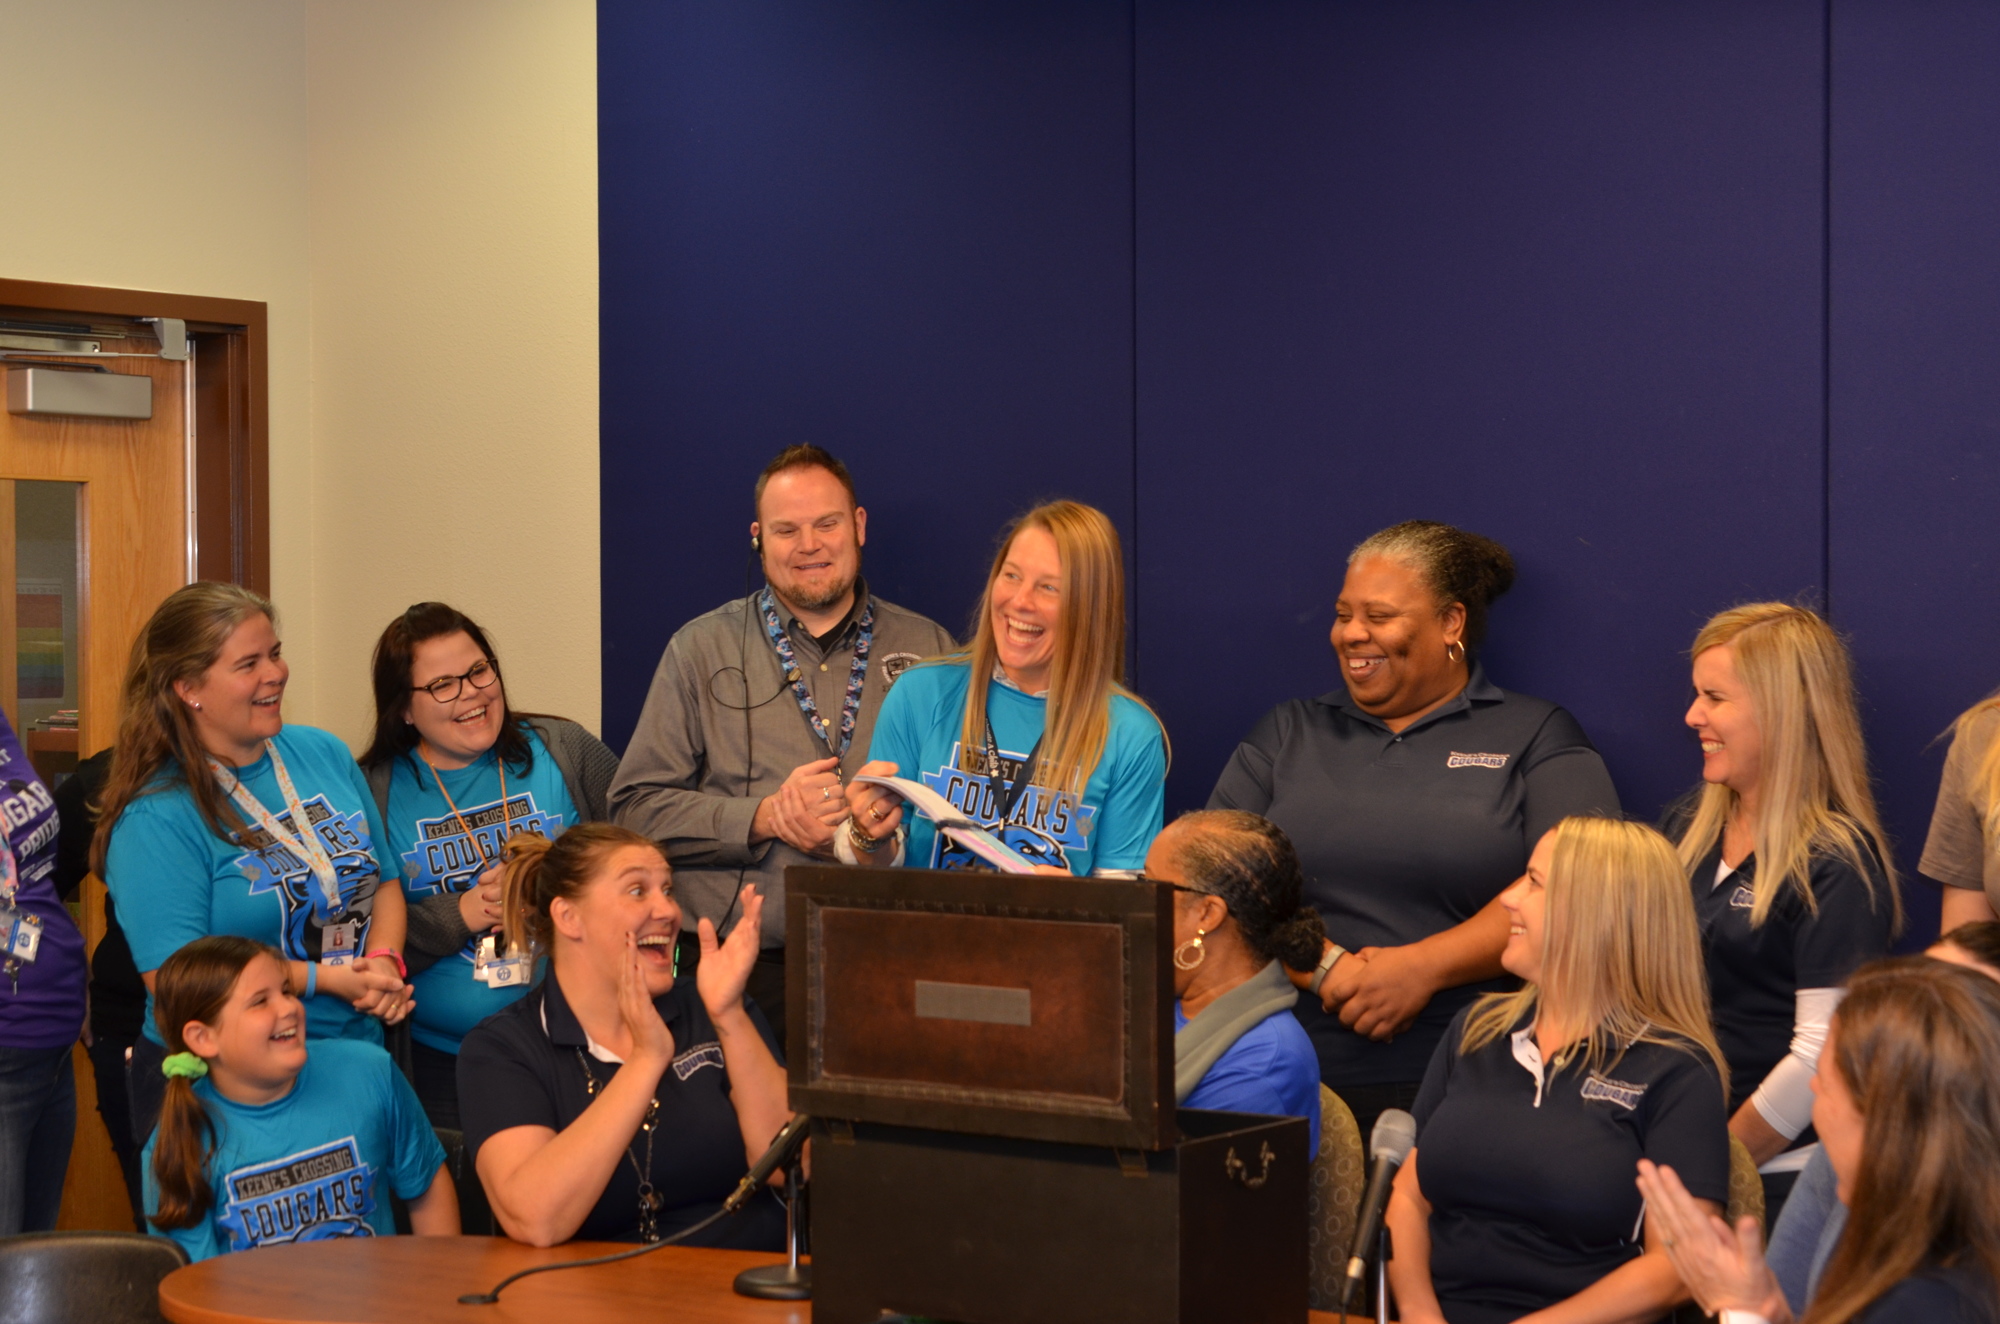 Teachers and staff react to one of the items pulled from the time capsule.